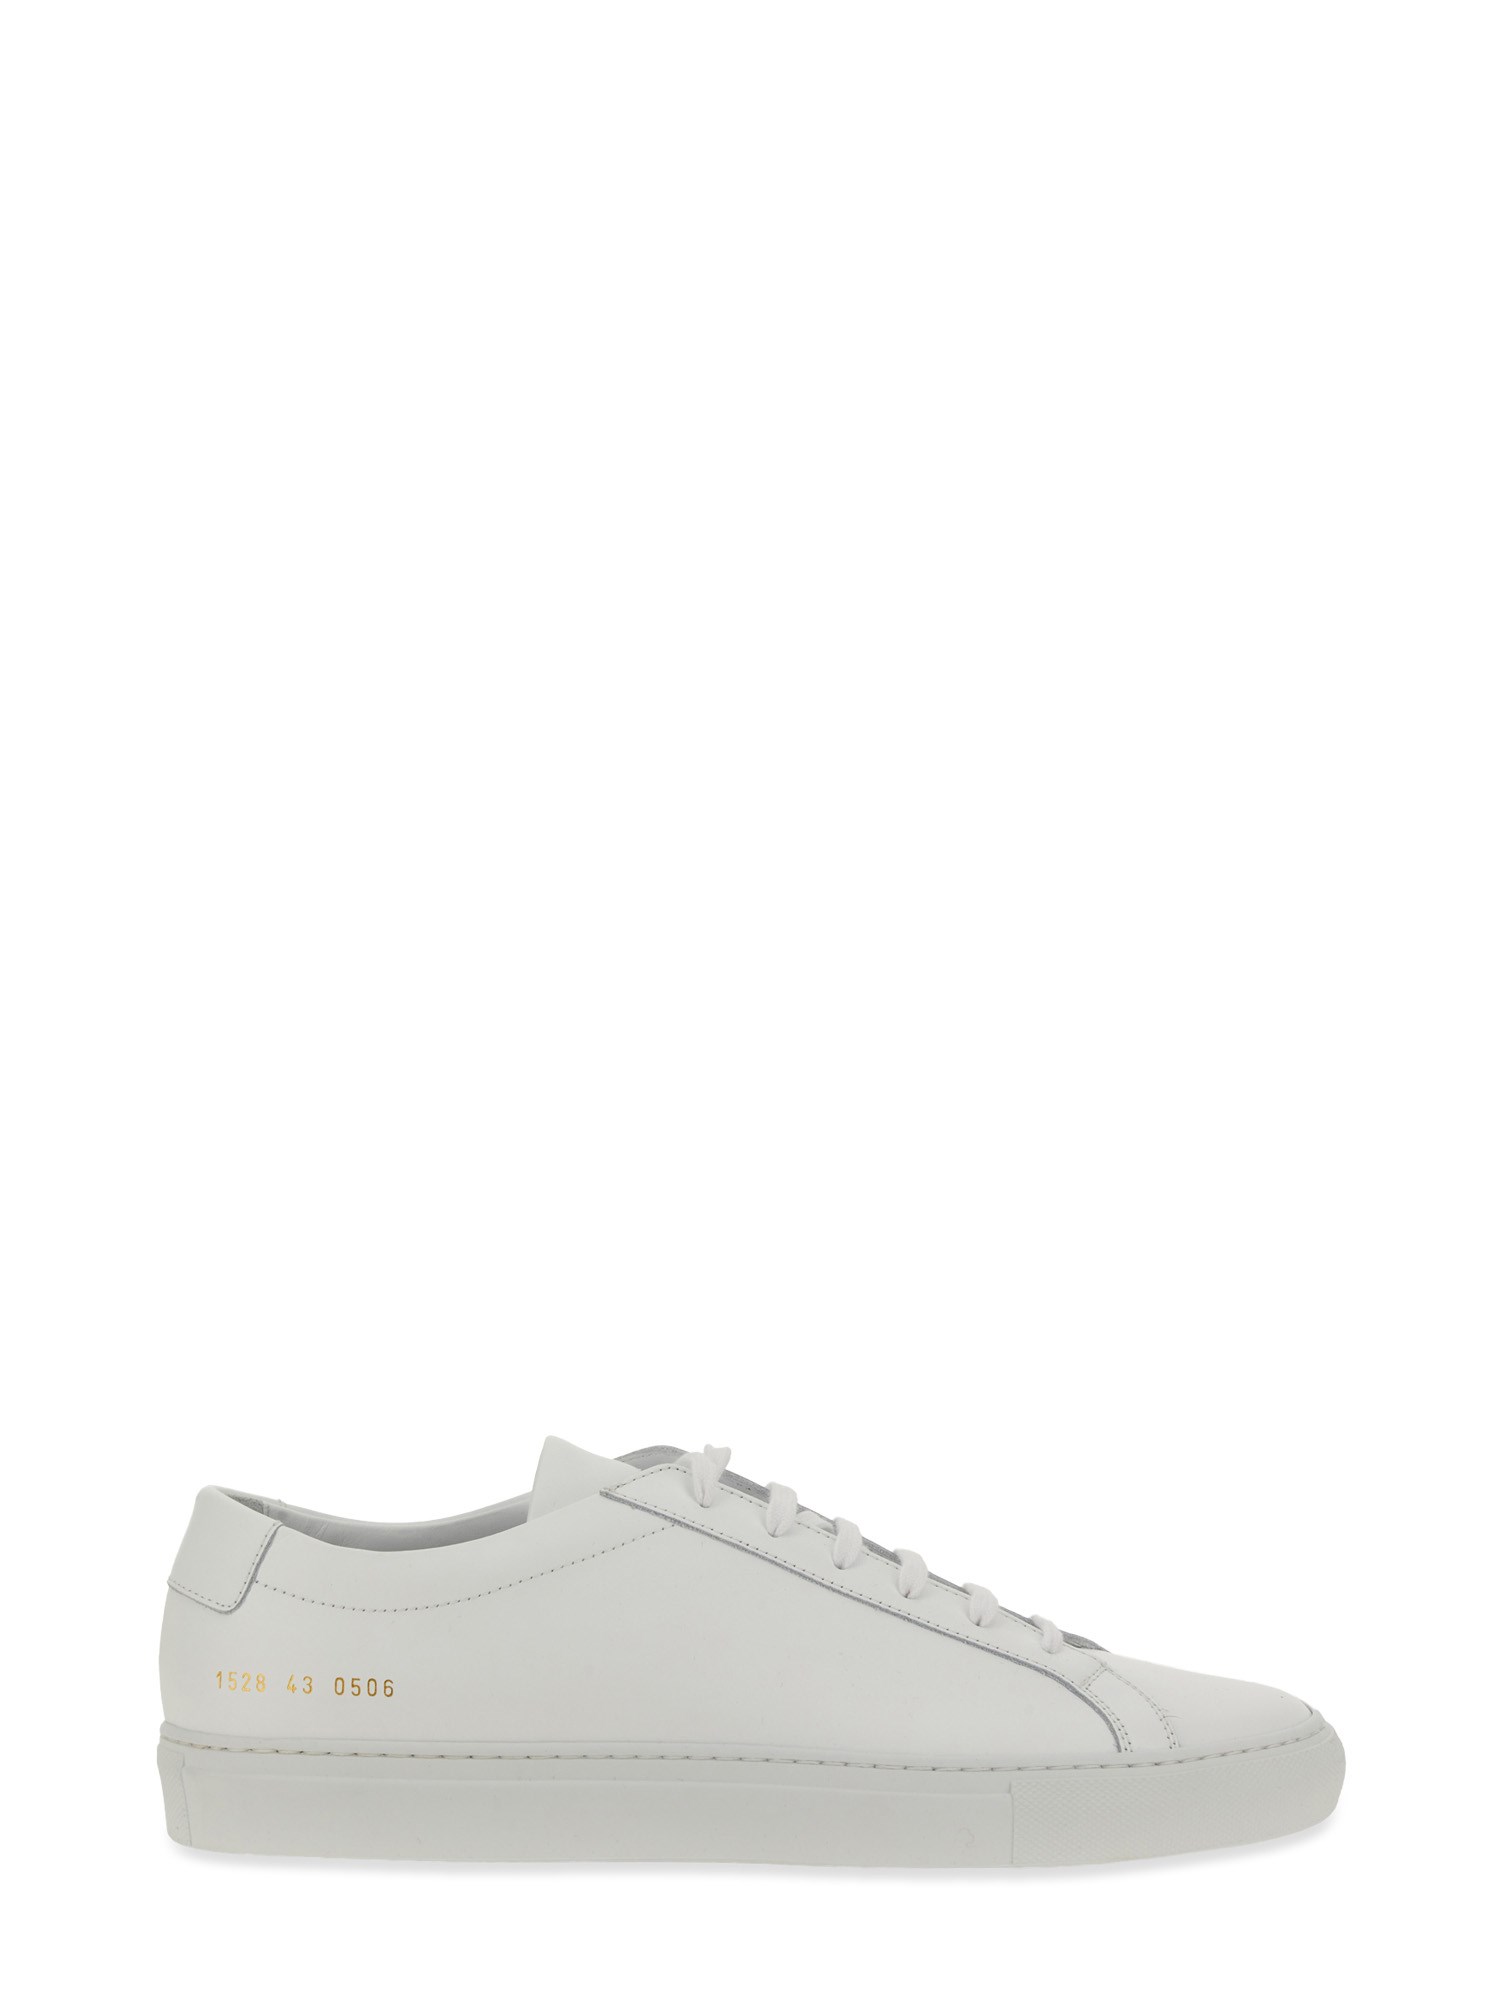 COMMON PROJECTS common projects sneaker low achilles original